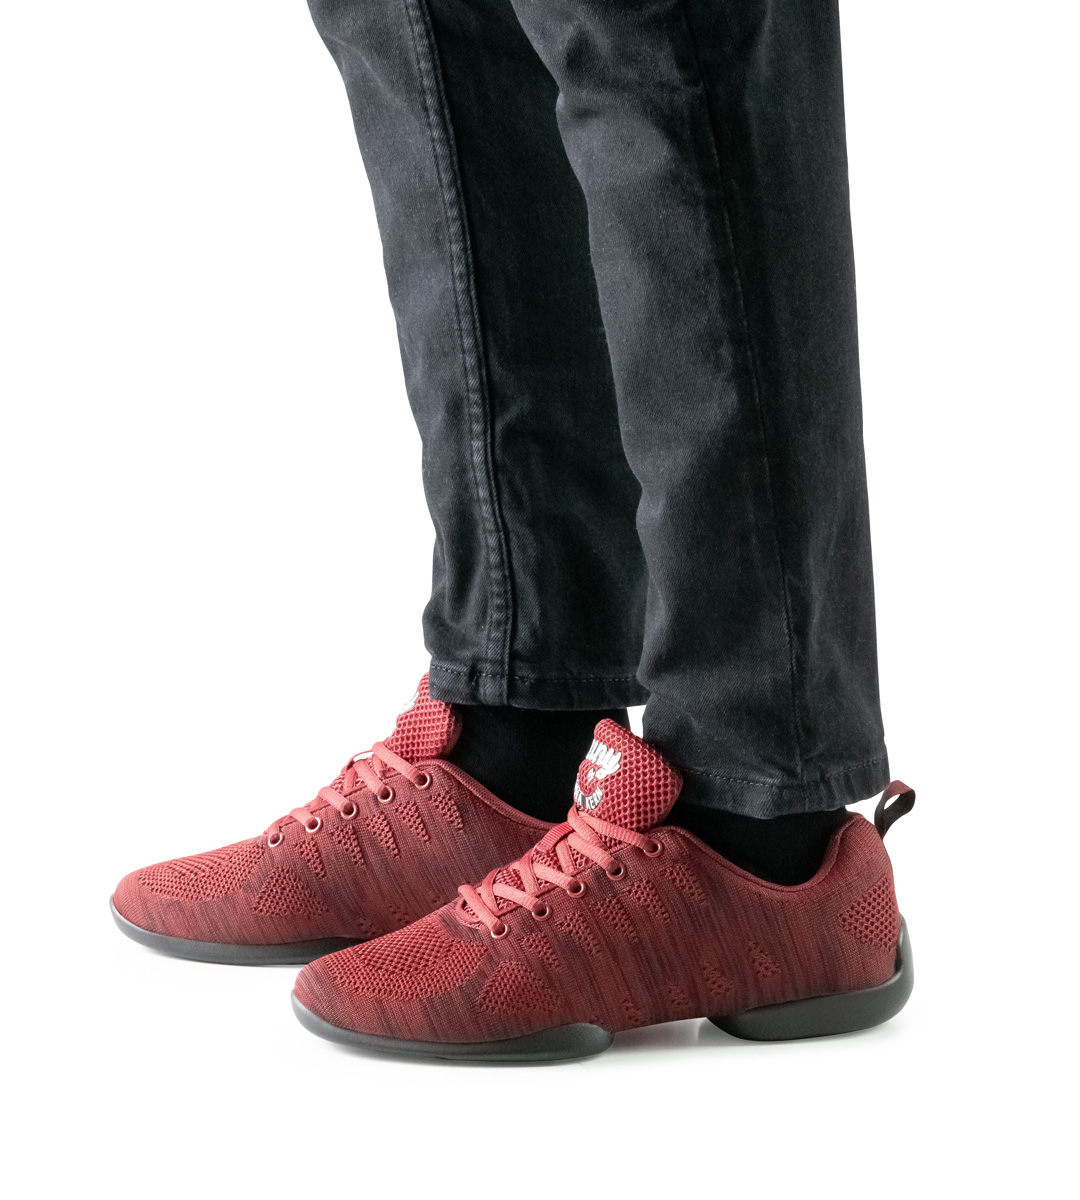 Black trousers in combination with red men's dance sneaker by Suny